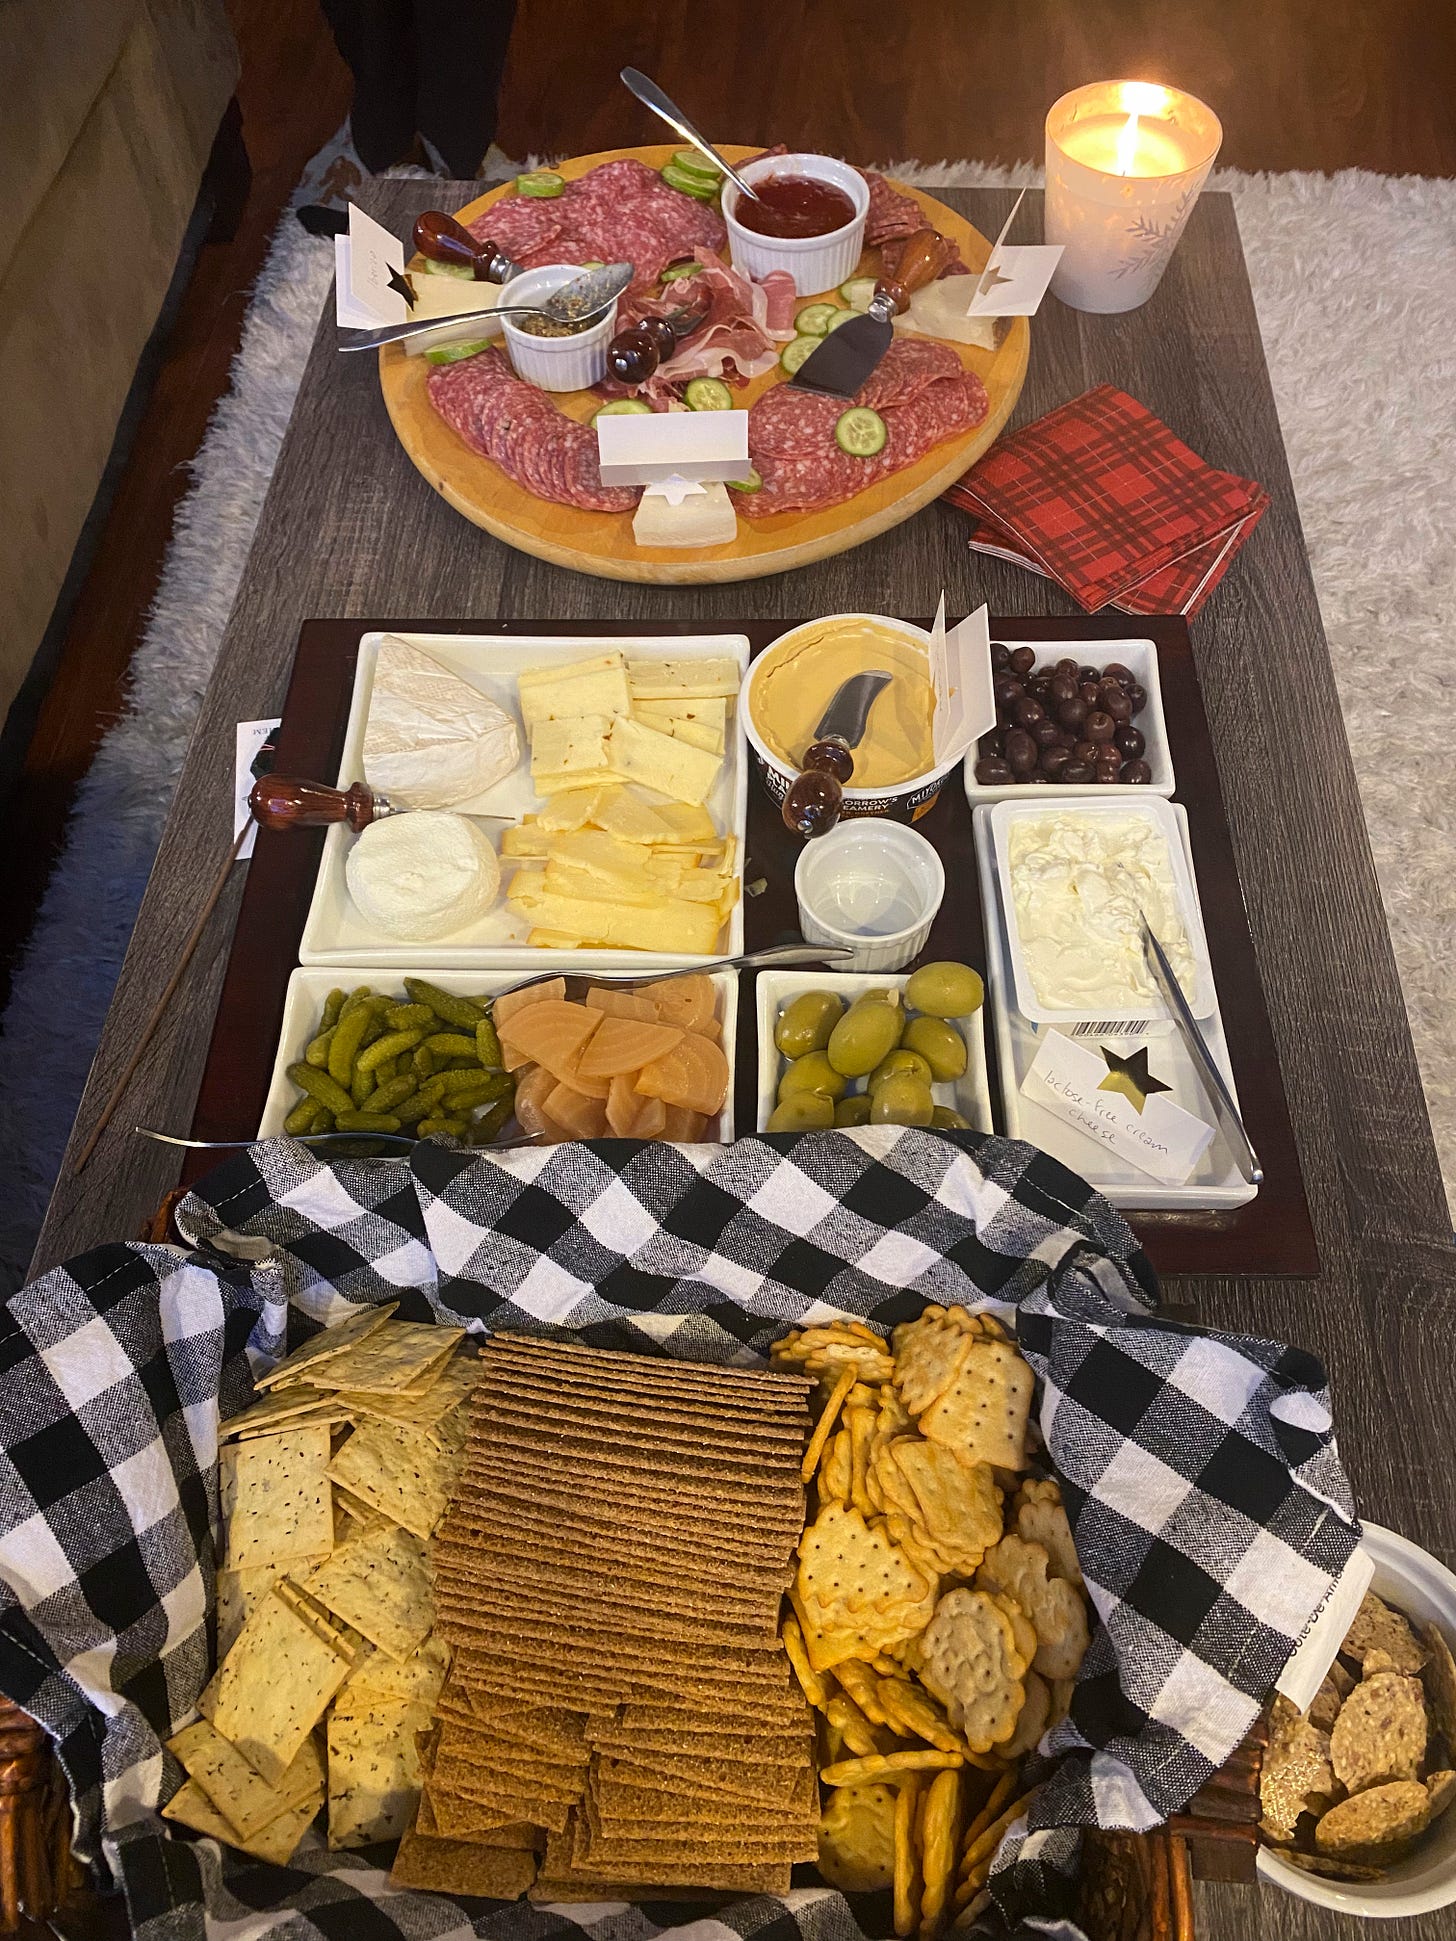 A coffee table with charcuterie. Furthest away is a wood lazy susan with meats, cucumber slices, Spanish cheeses, and ramekins of mustard and jam. In the middle is a divided serving platter with several types of cheese, olives, and pickles. In the foreground is a basked of three different types of crackers, lined with a black-and-white gingham napkin.